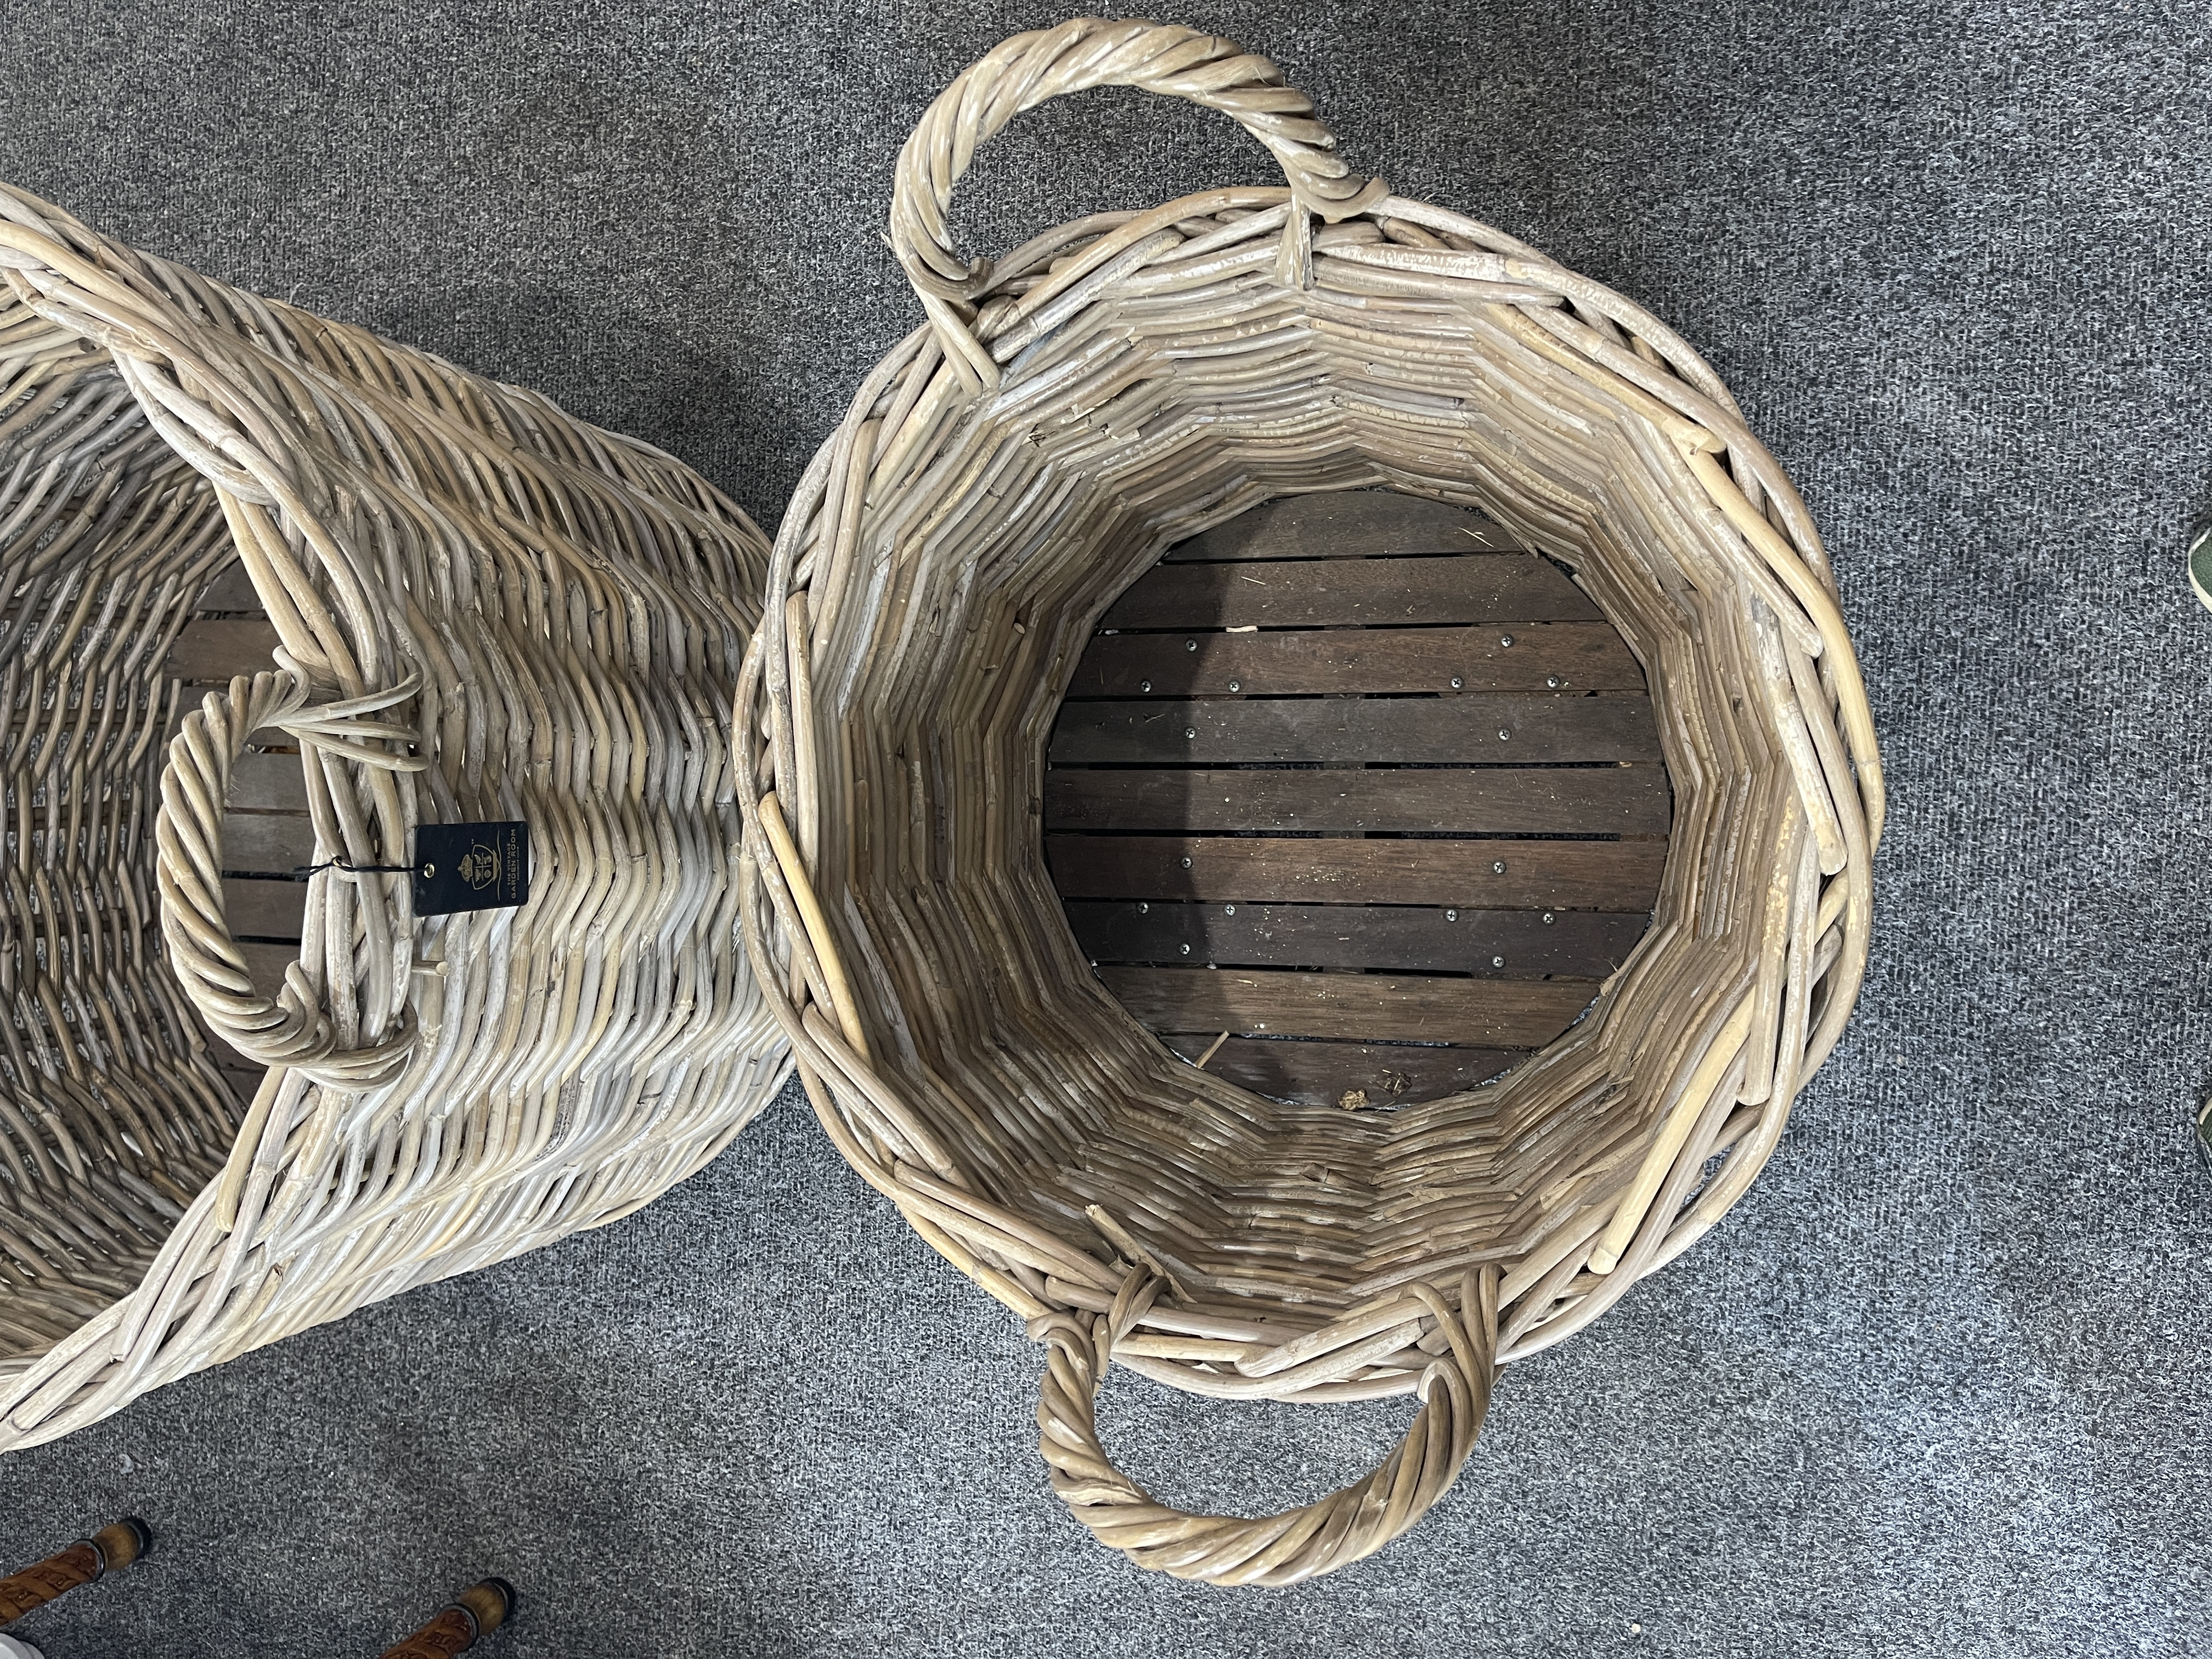 Two Large Vintage Wicker Baskets / Garden Rooms. - Image 5 of 7